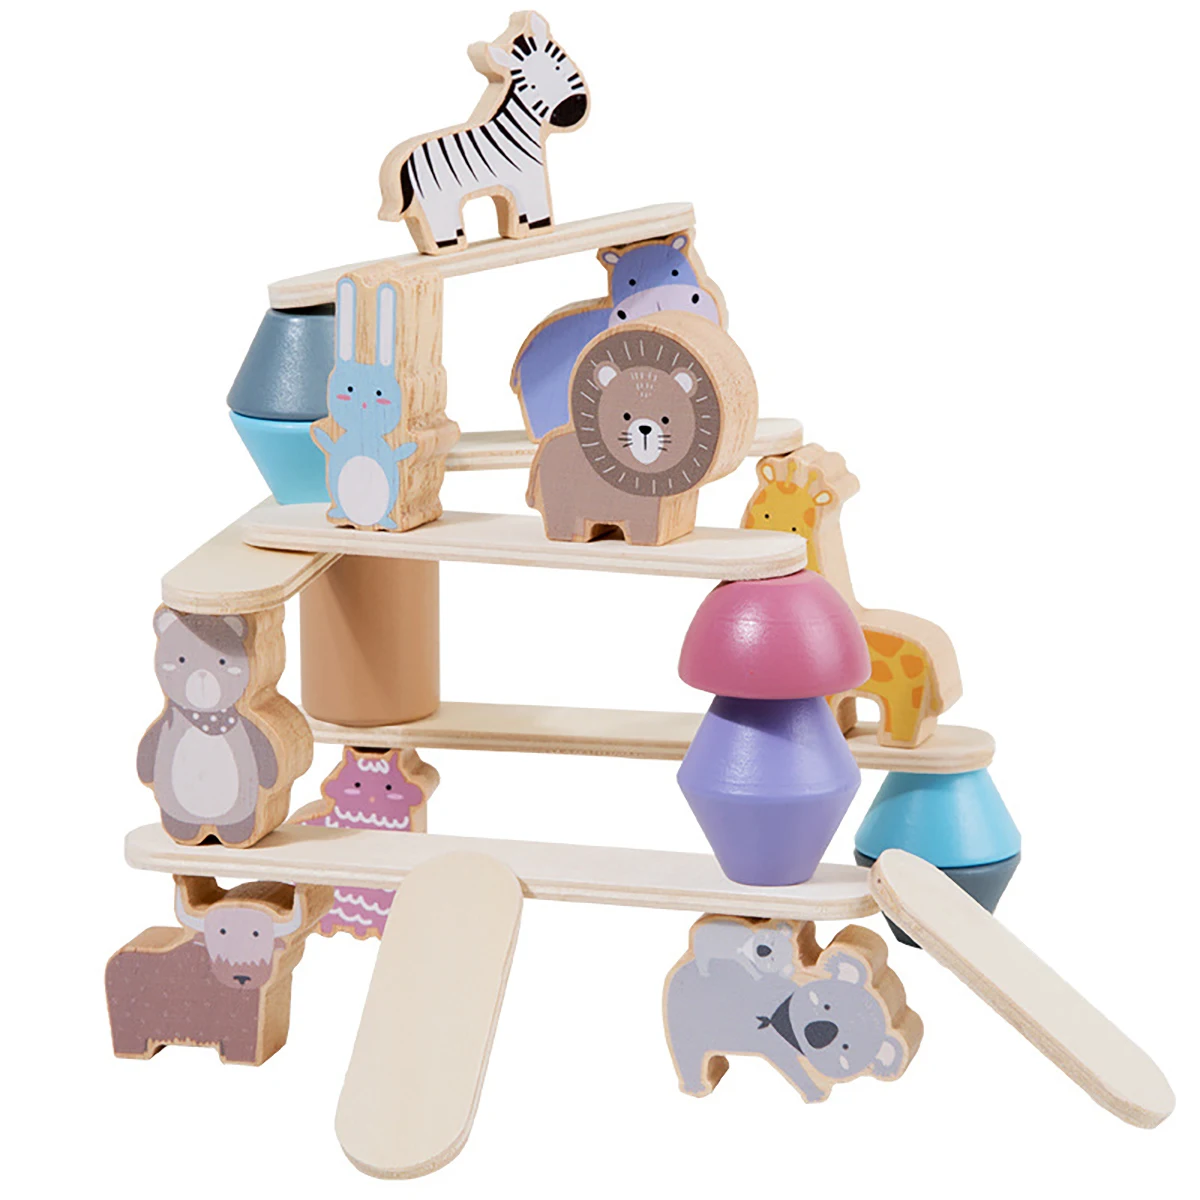 

1 Set Wooden Animals Balance Stacking Blocks Game, Suitable For Developing Sorting, Stacking, Montessori Toy For Pretend Play